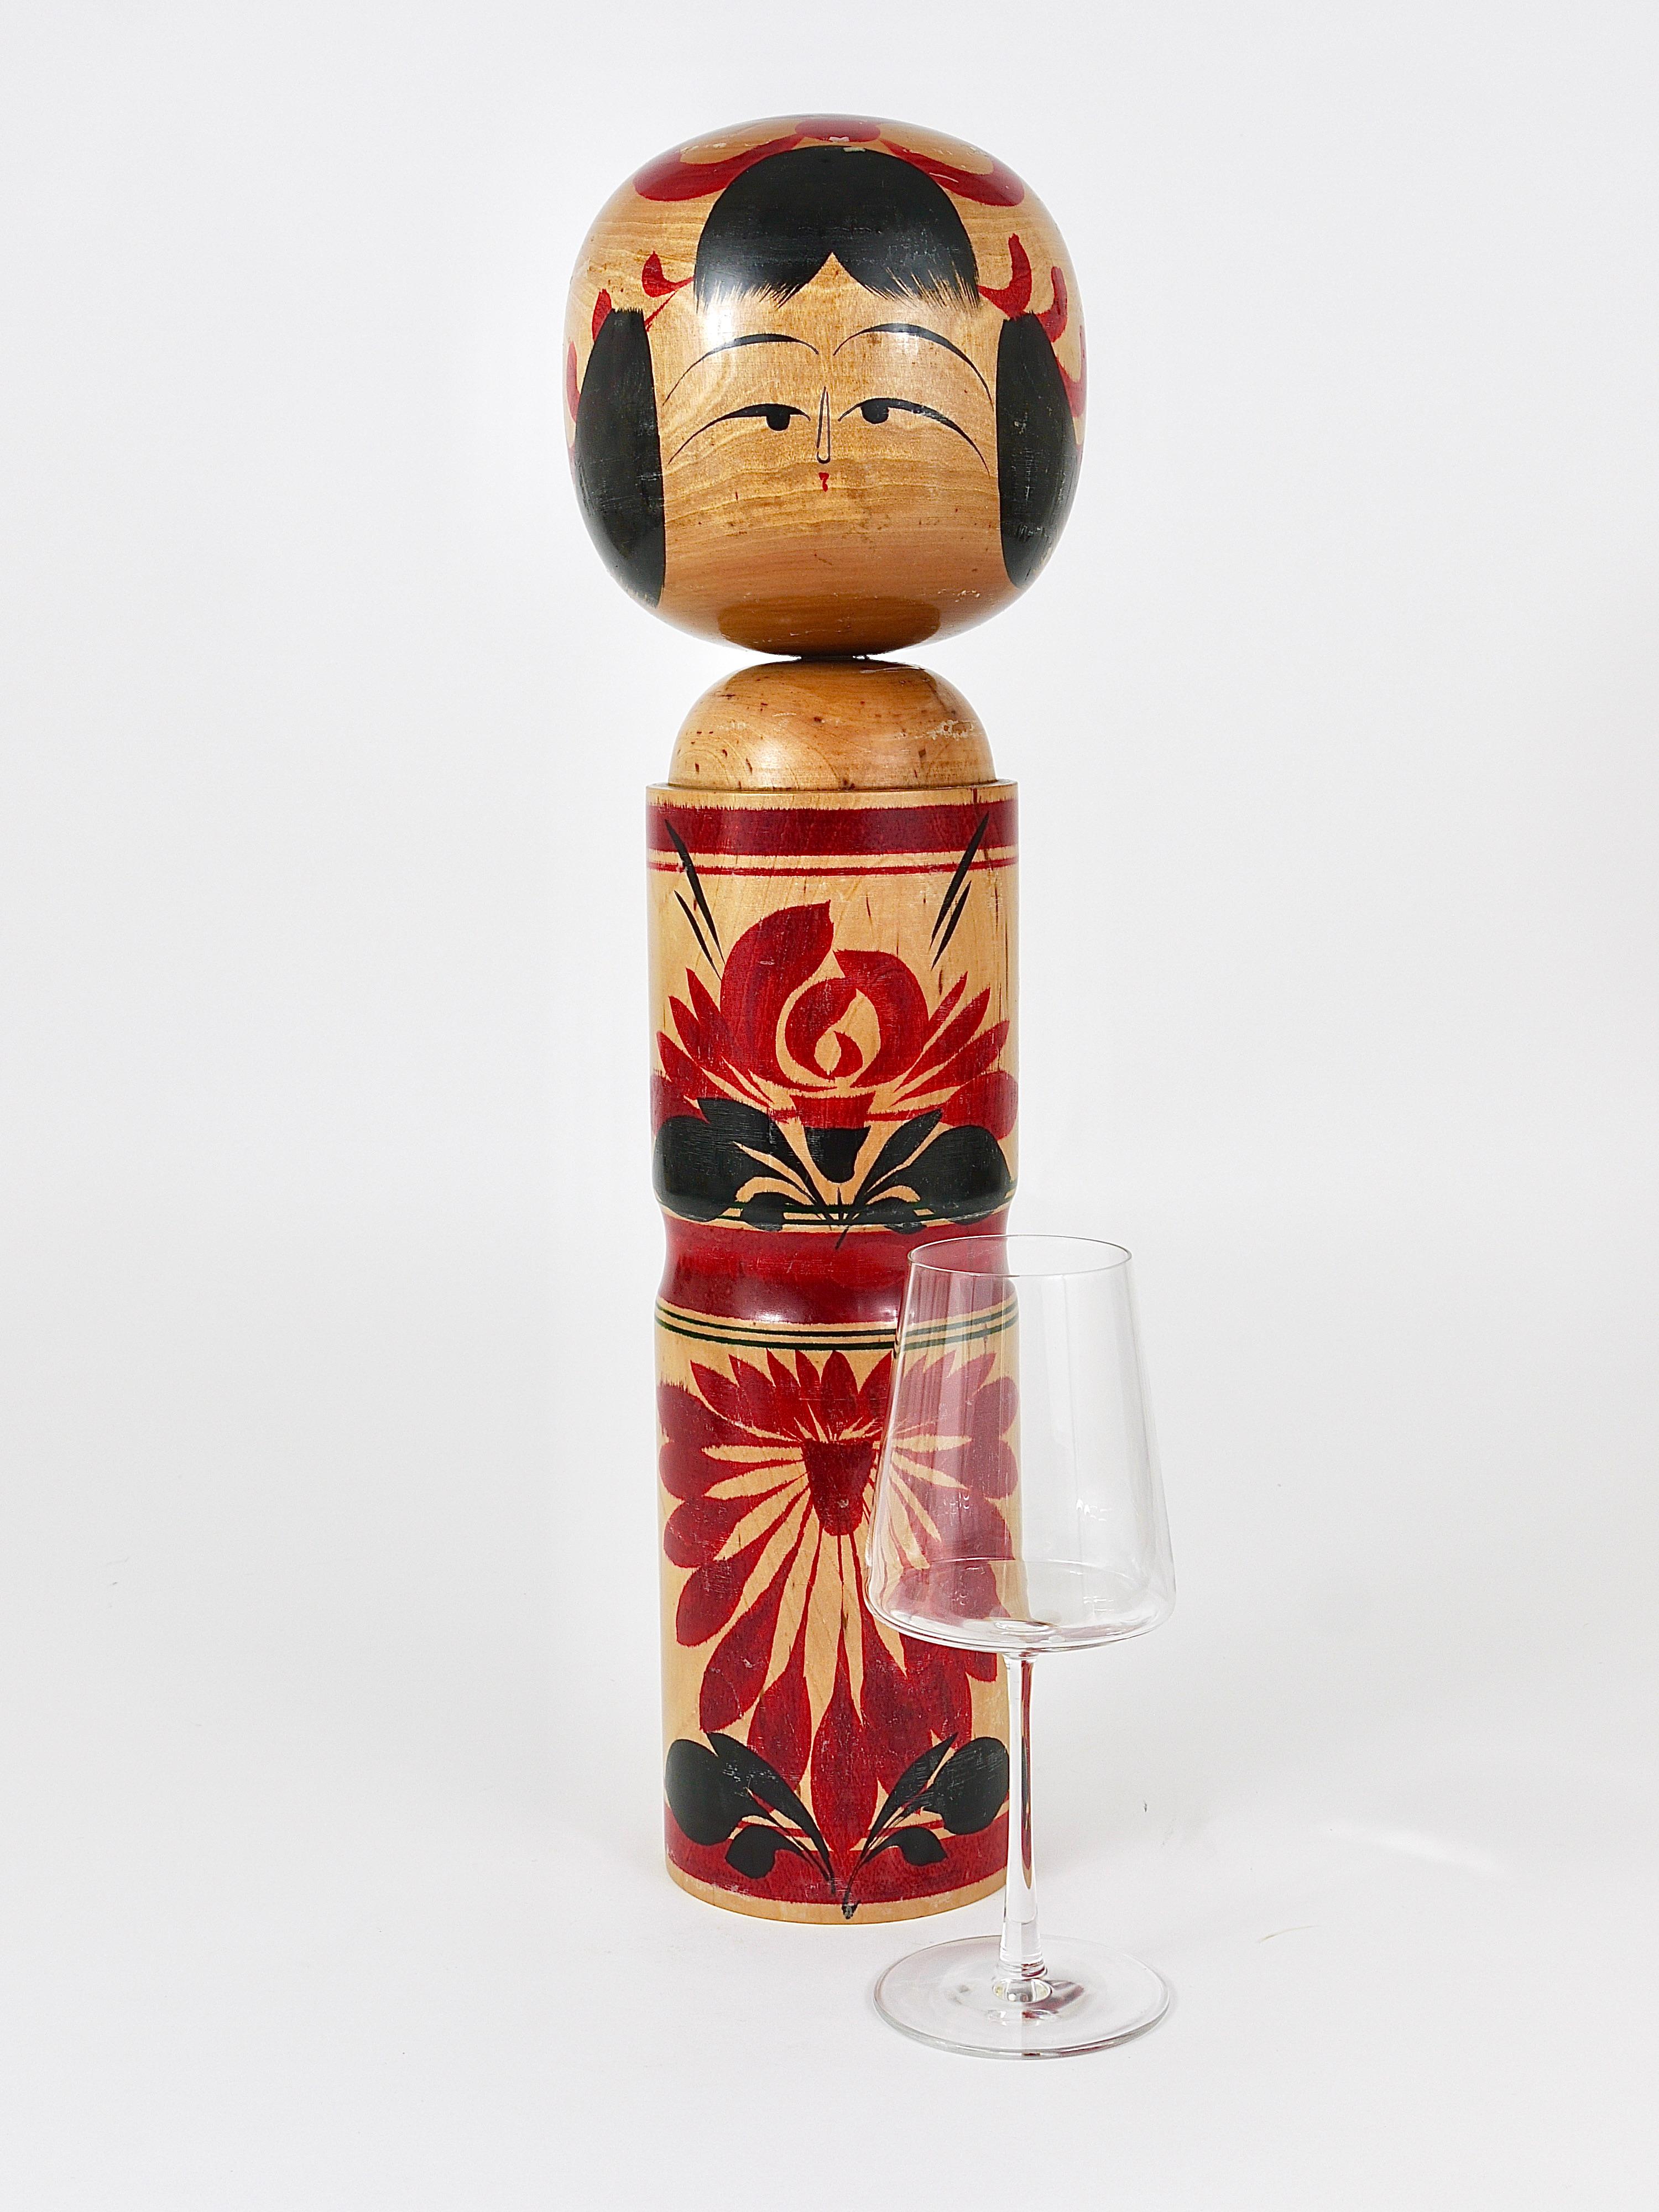 Hand-Carved Decorative Kokeshi Doll Sculpture from Northern Japan, Hand-Painted, Signed